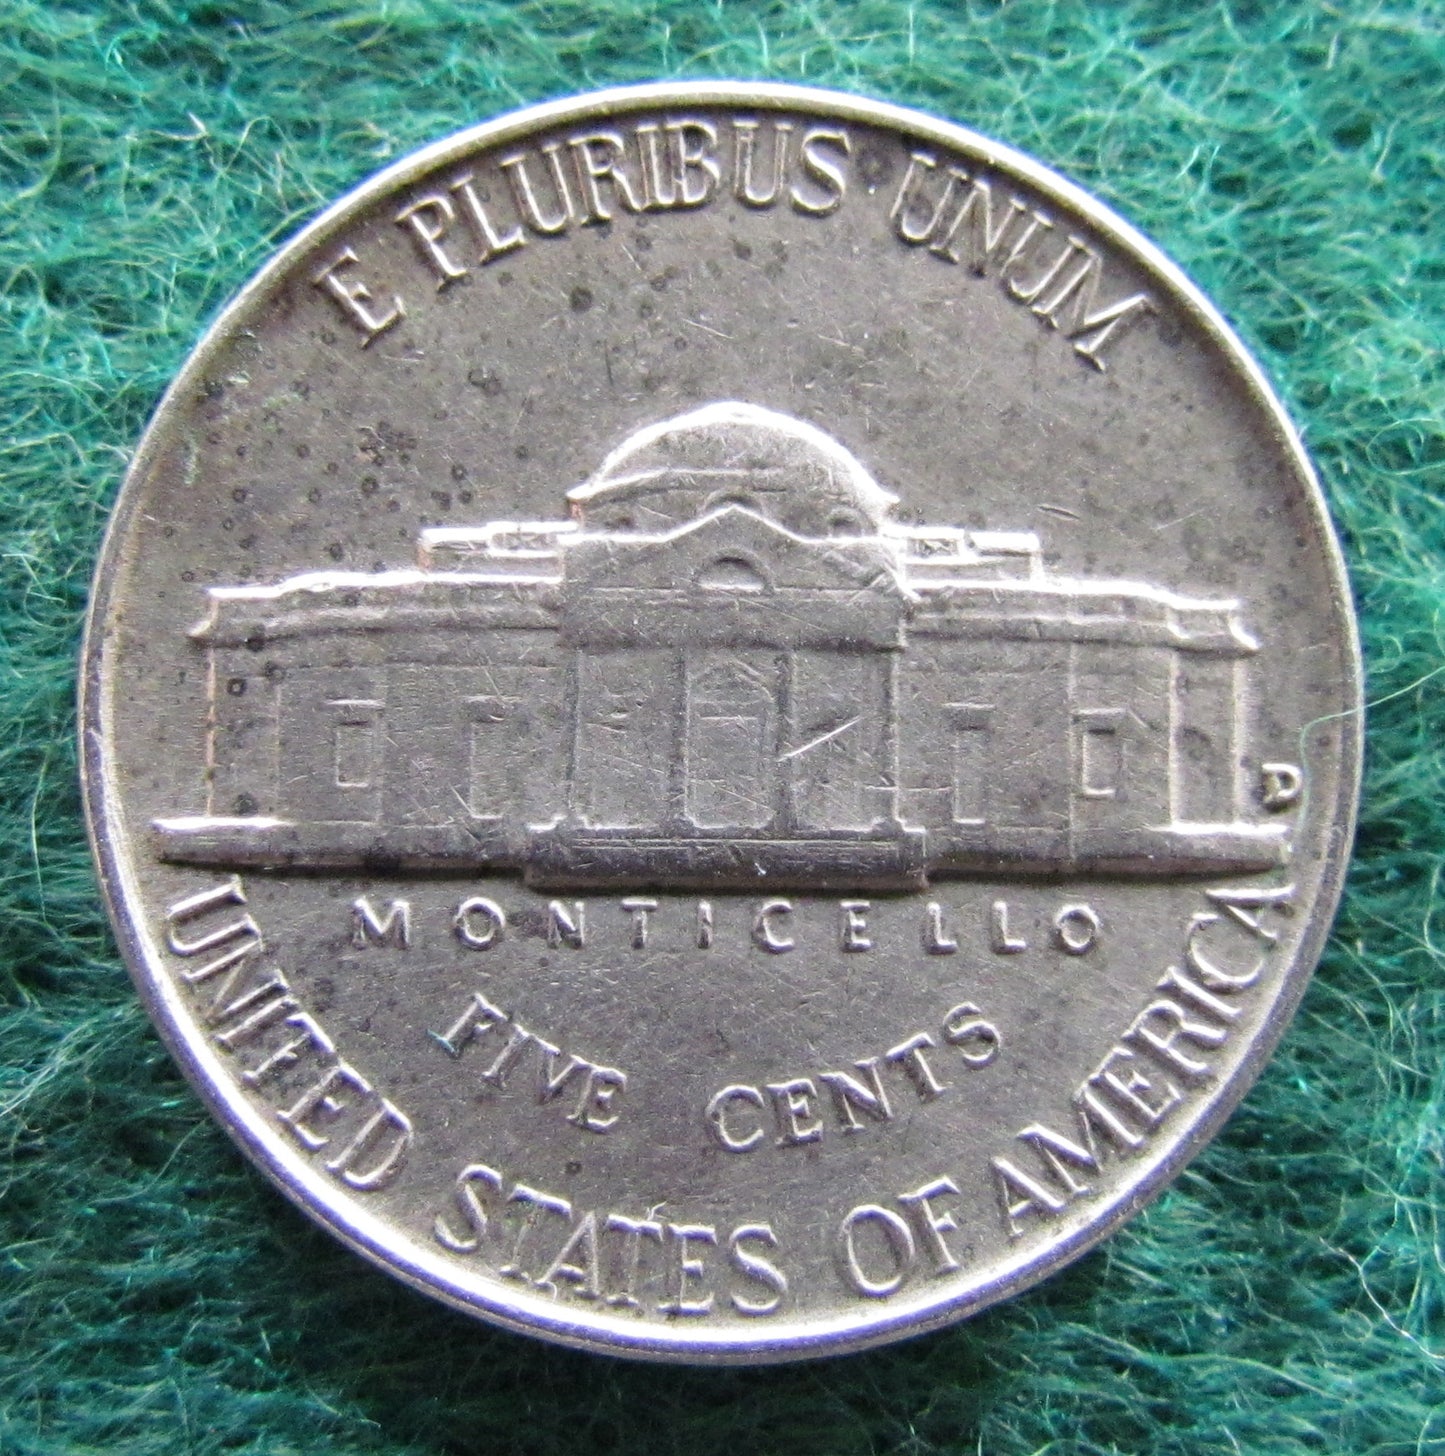 USA American 1955 D Nickel Jefferson Coin - Circulated